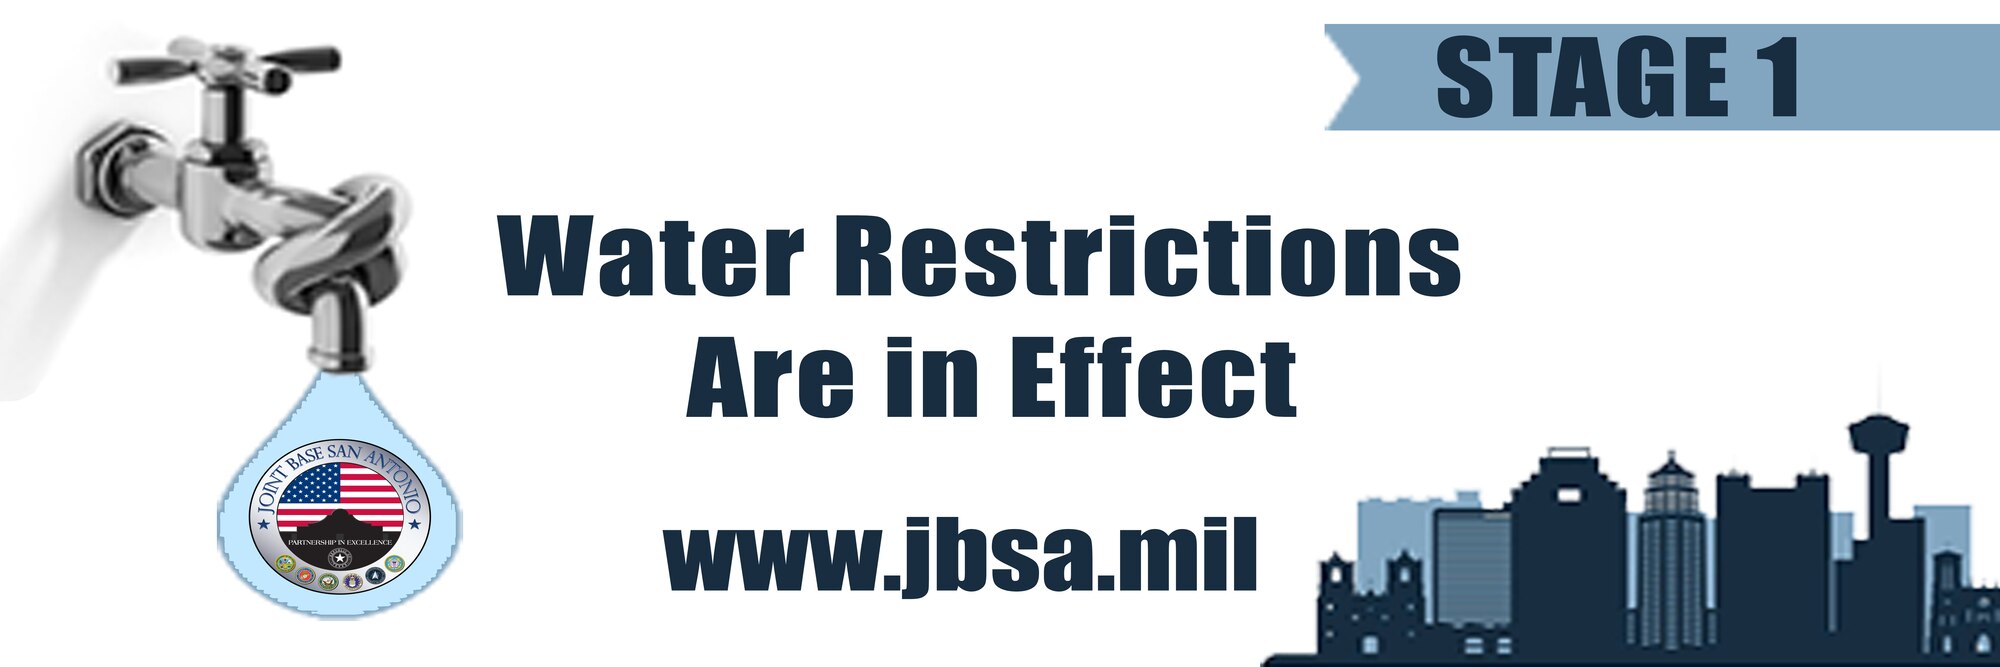 Stage 1 water restrictions implemented across JBSA